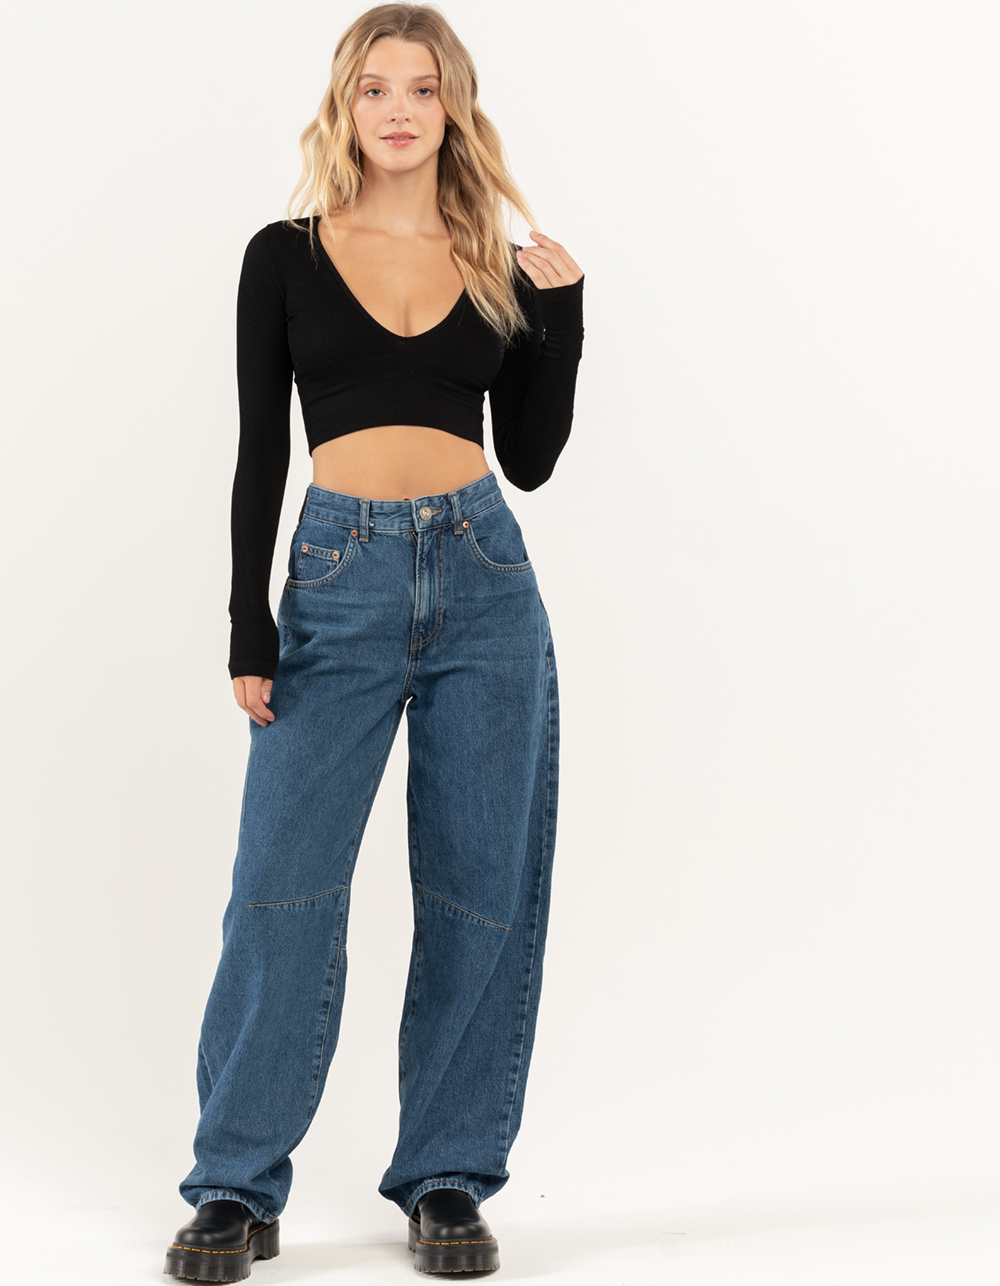 BDG URBAN OUTFITTERS Logan Womens Cinch Back Jeans